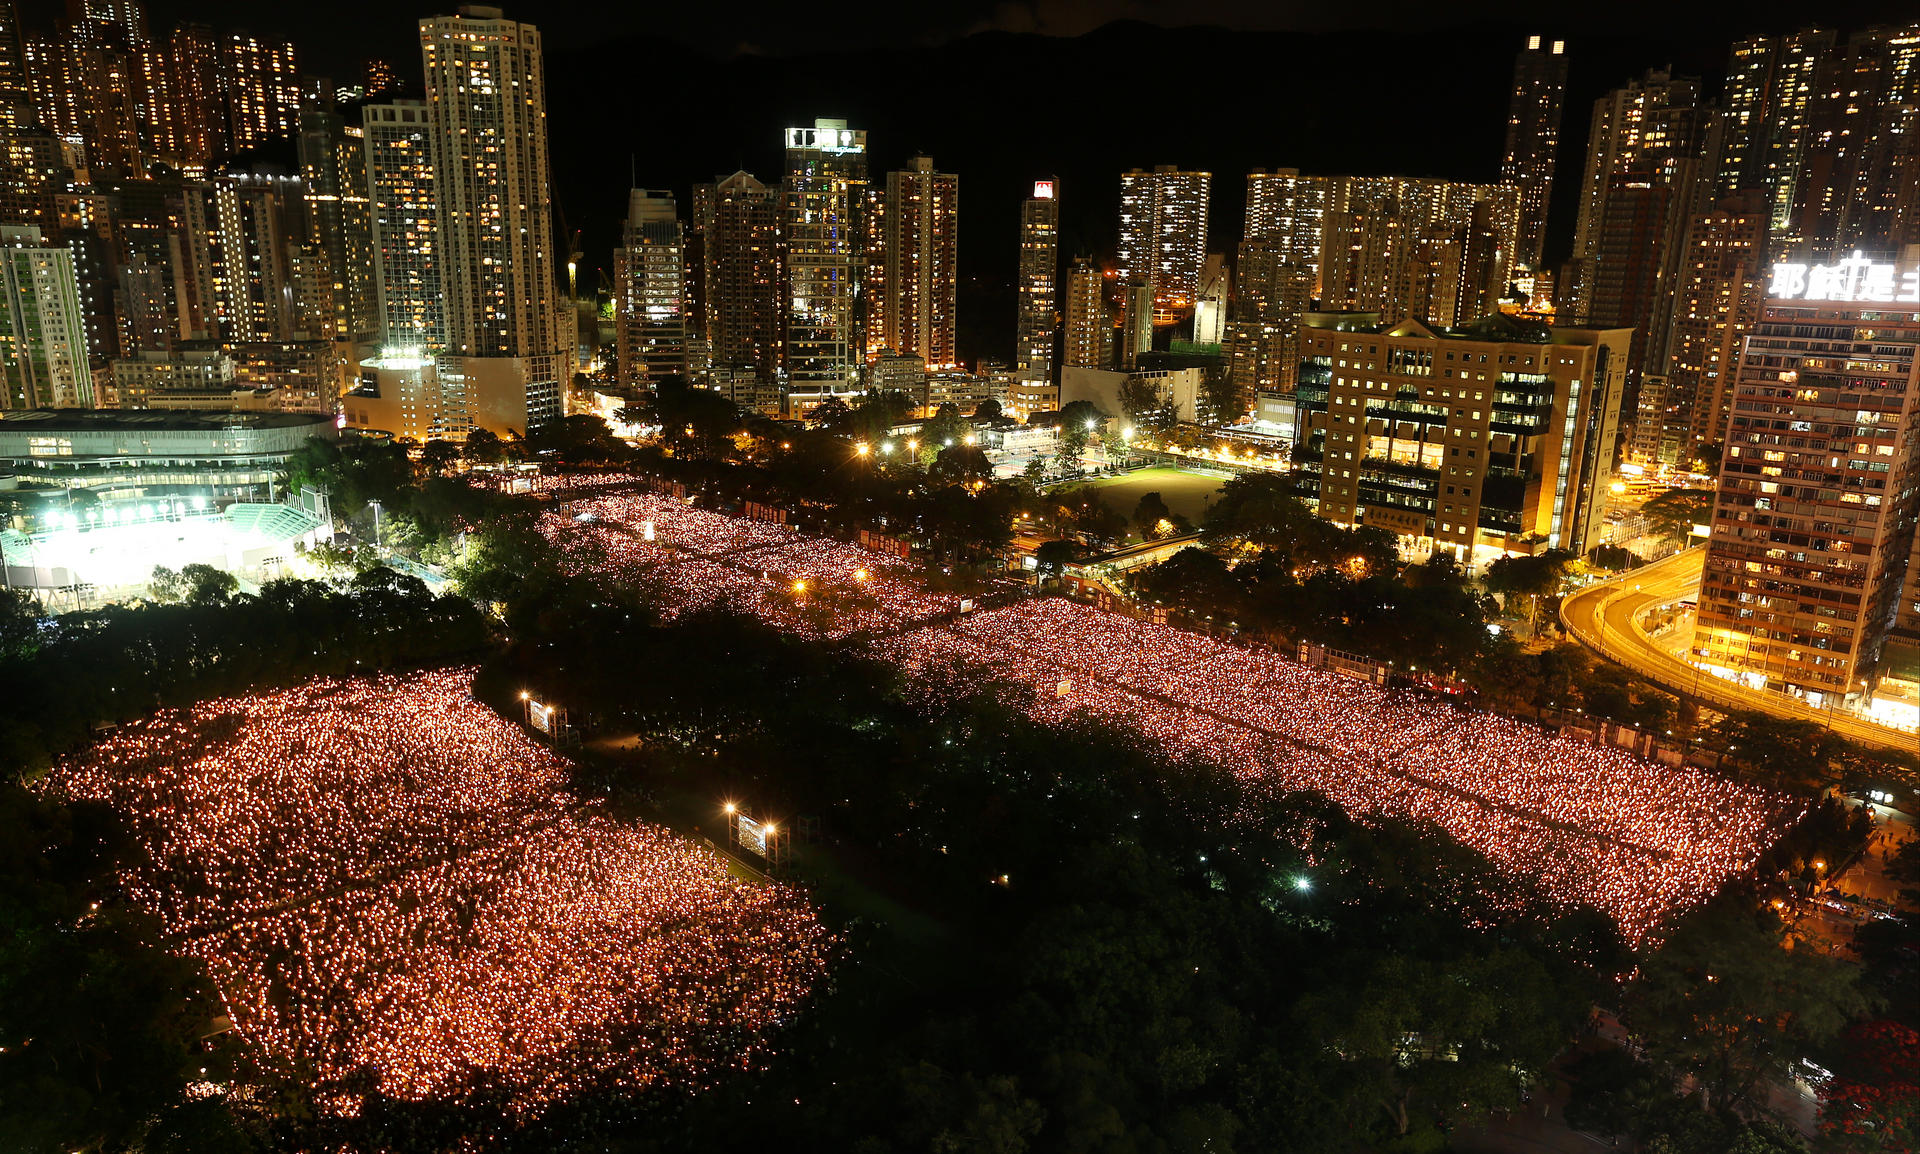 Victoria Park shines with a sea of candlelight during the vigil, which drew at least 99,500 people to markthe 25th anniversary of the Tiananmen crackdown. Photo: K. Y. Cheng